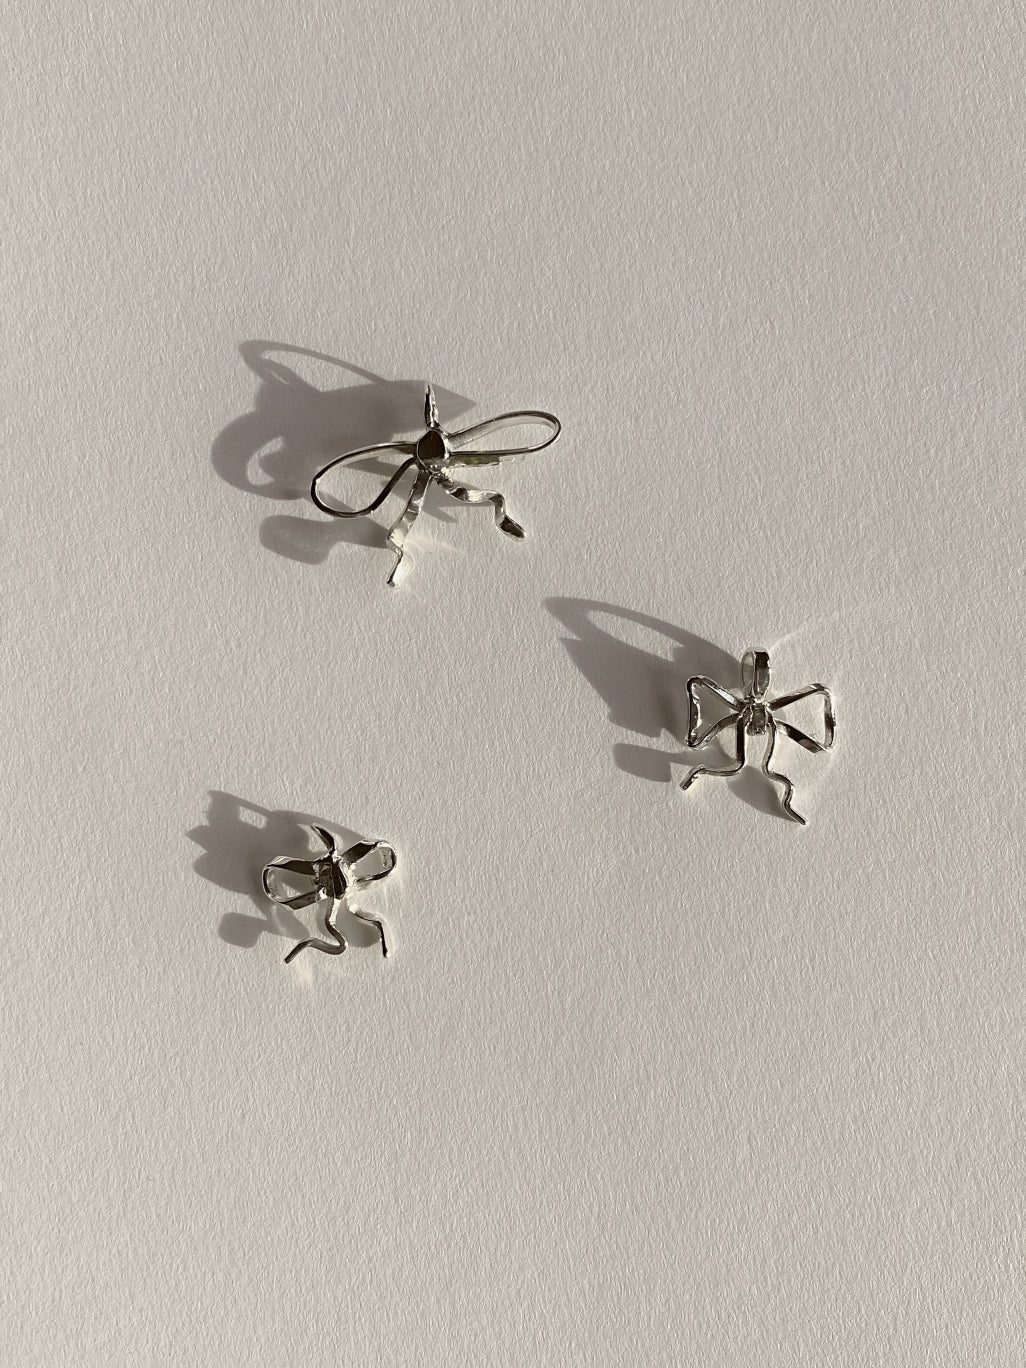 3 silver bow pendants on white background